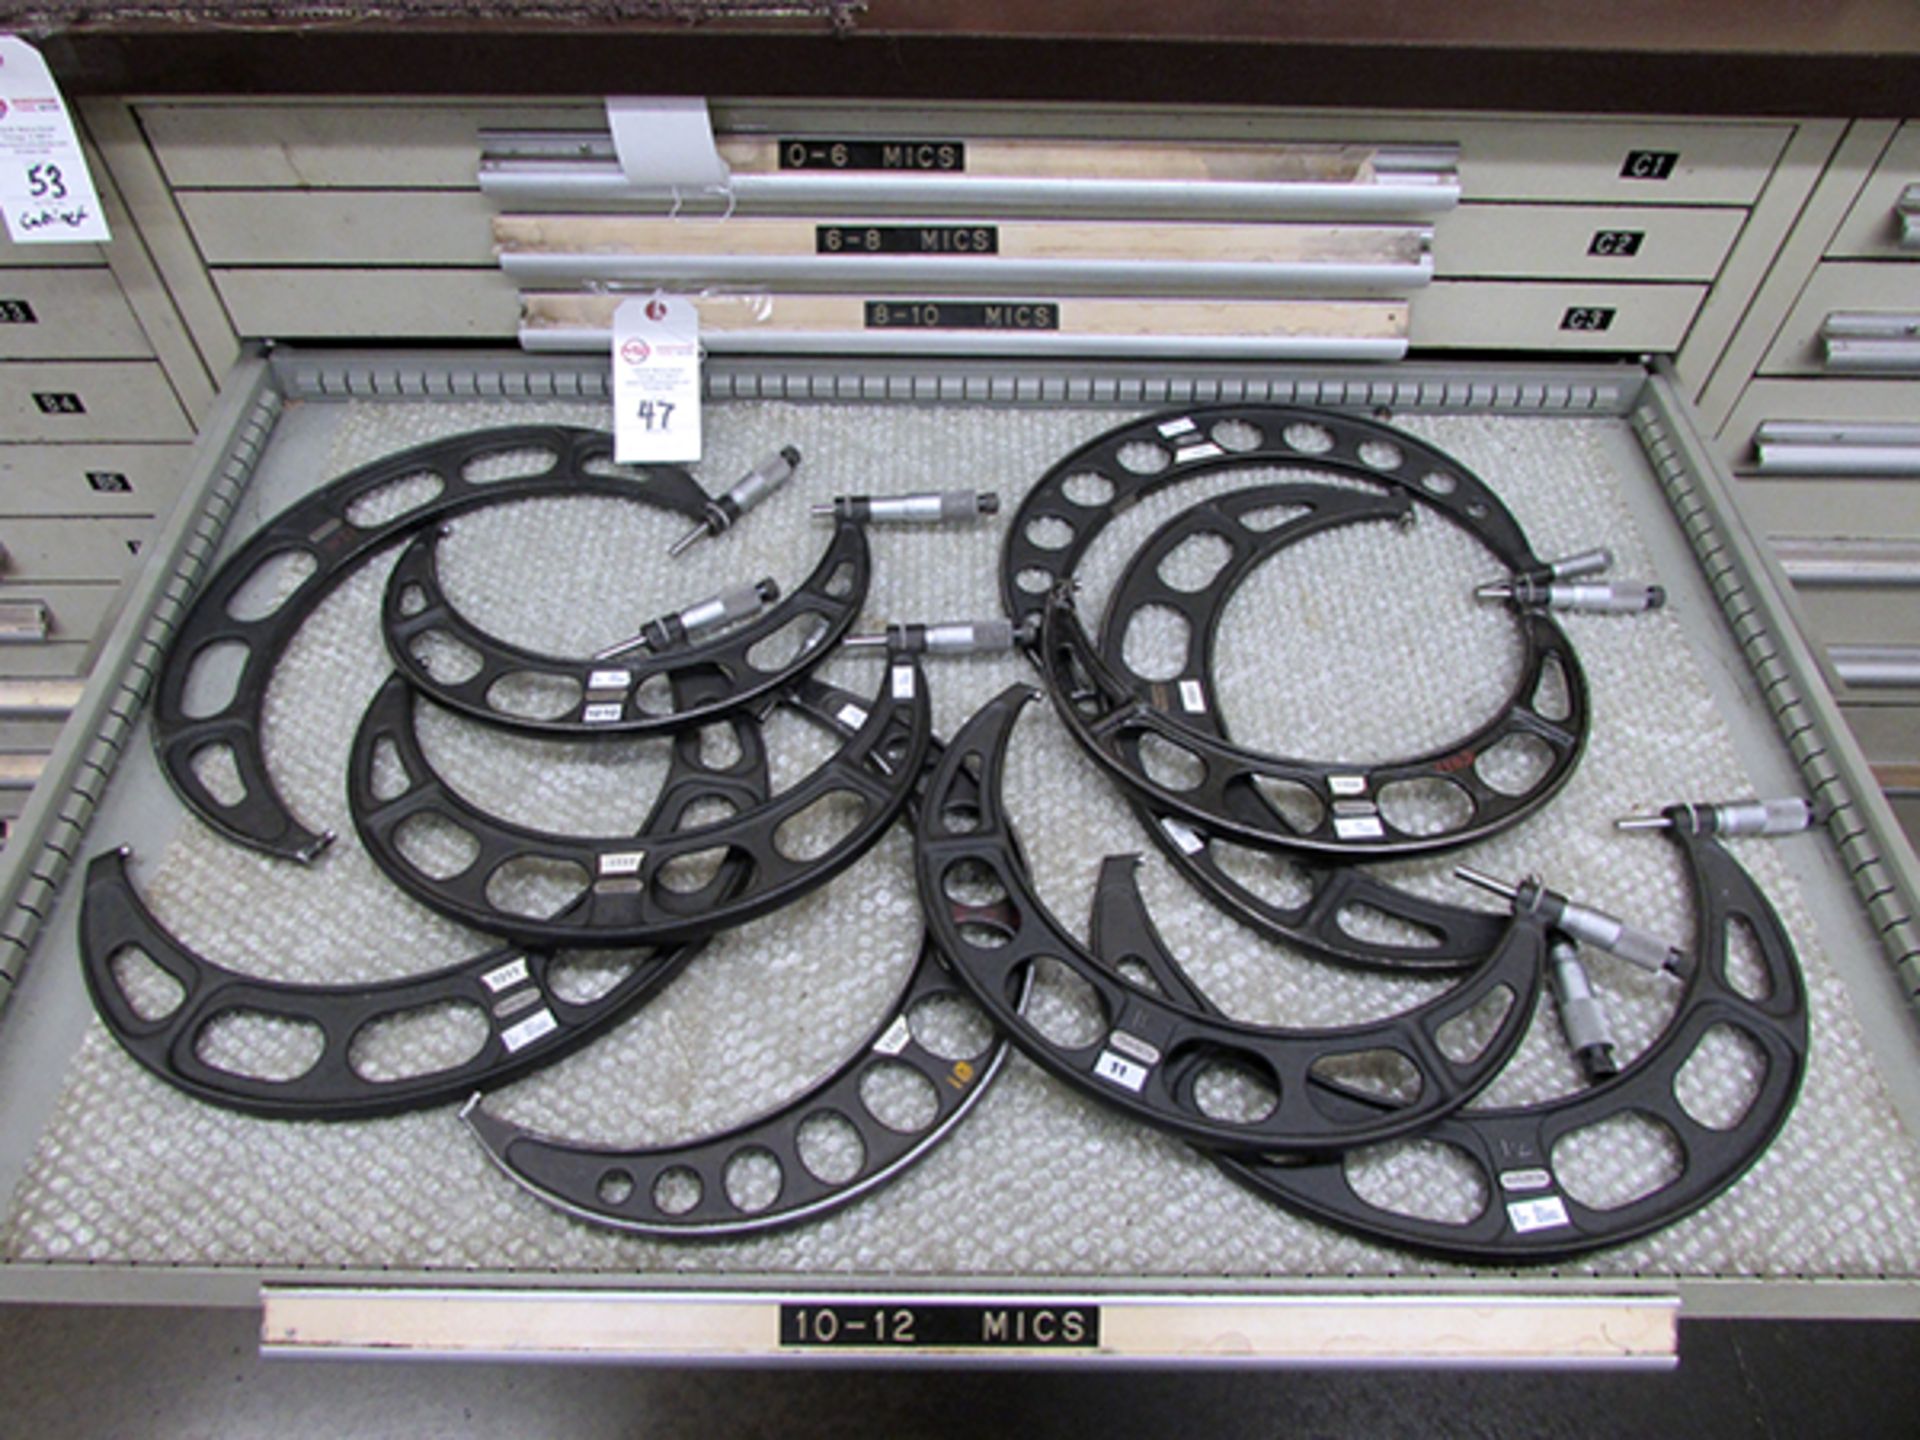 (15) 8"-12" Micrometers in 2 Cabinet Drawers - Image 2 of 2